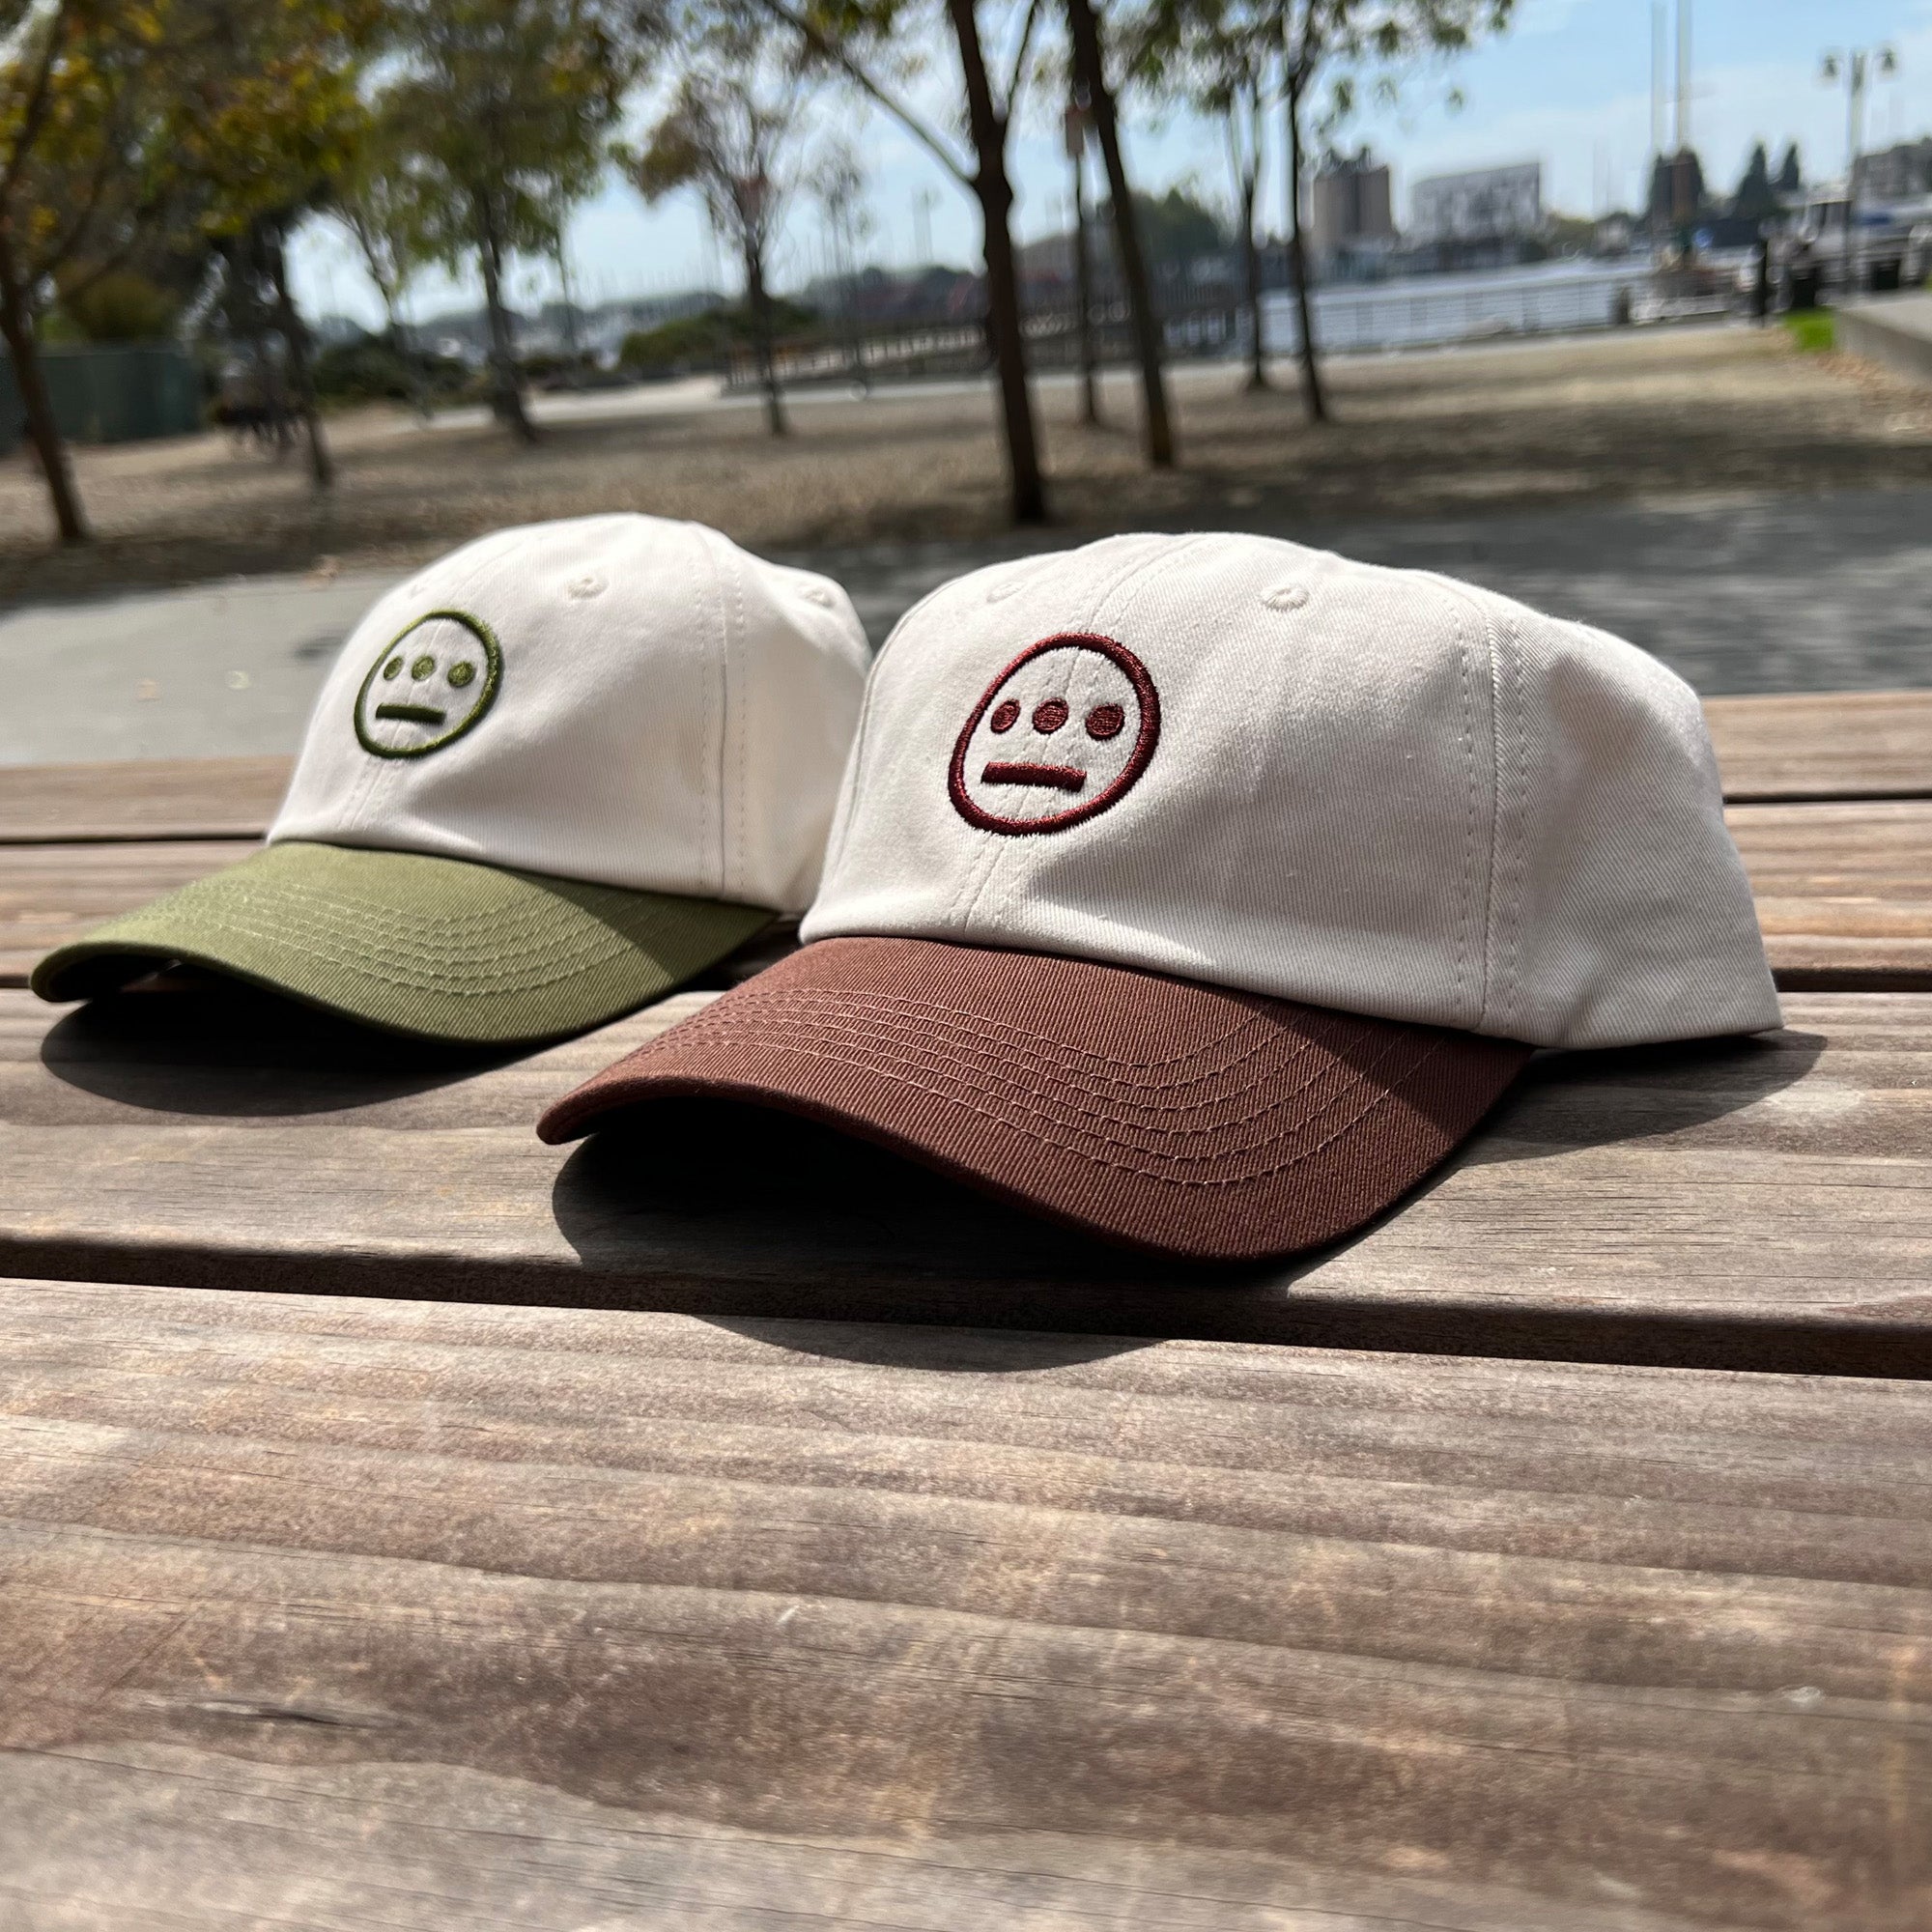 Photo image (left to right) of cream with olive logo and cream with brown logo dad hats with contrasting brims and embroidered logo